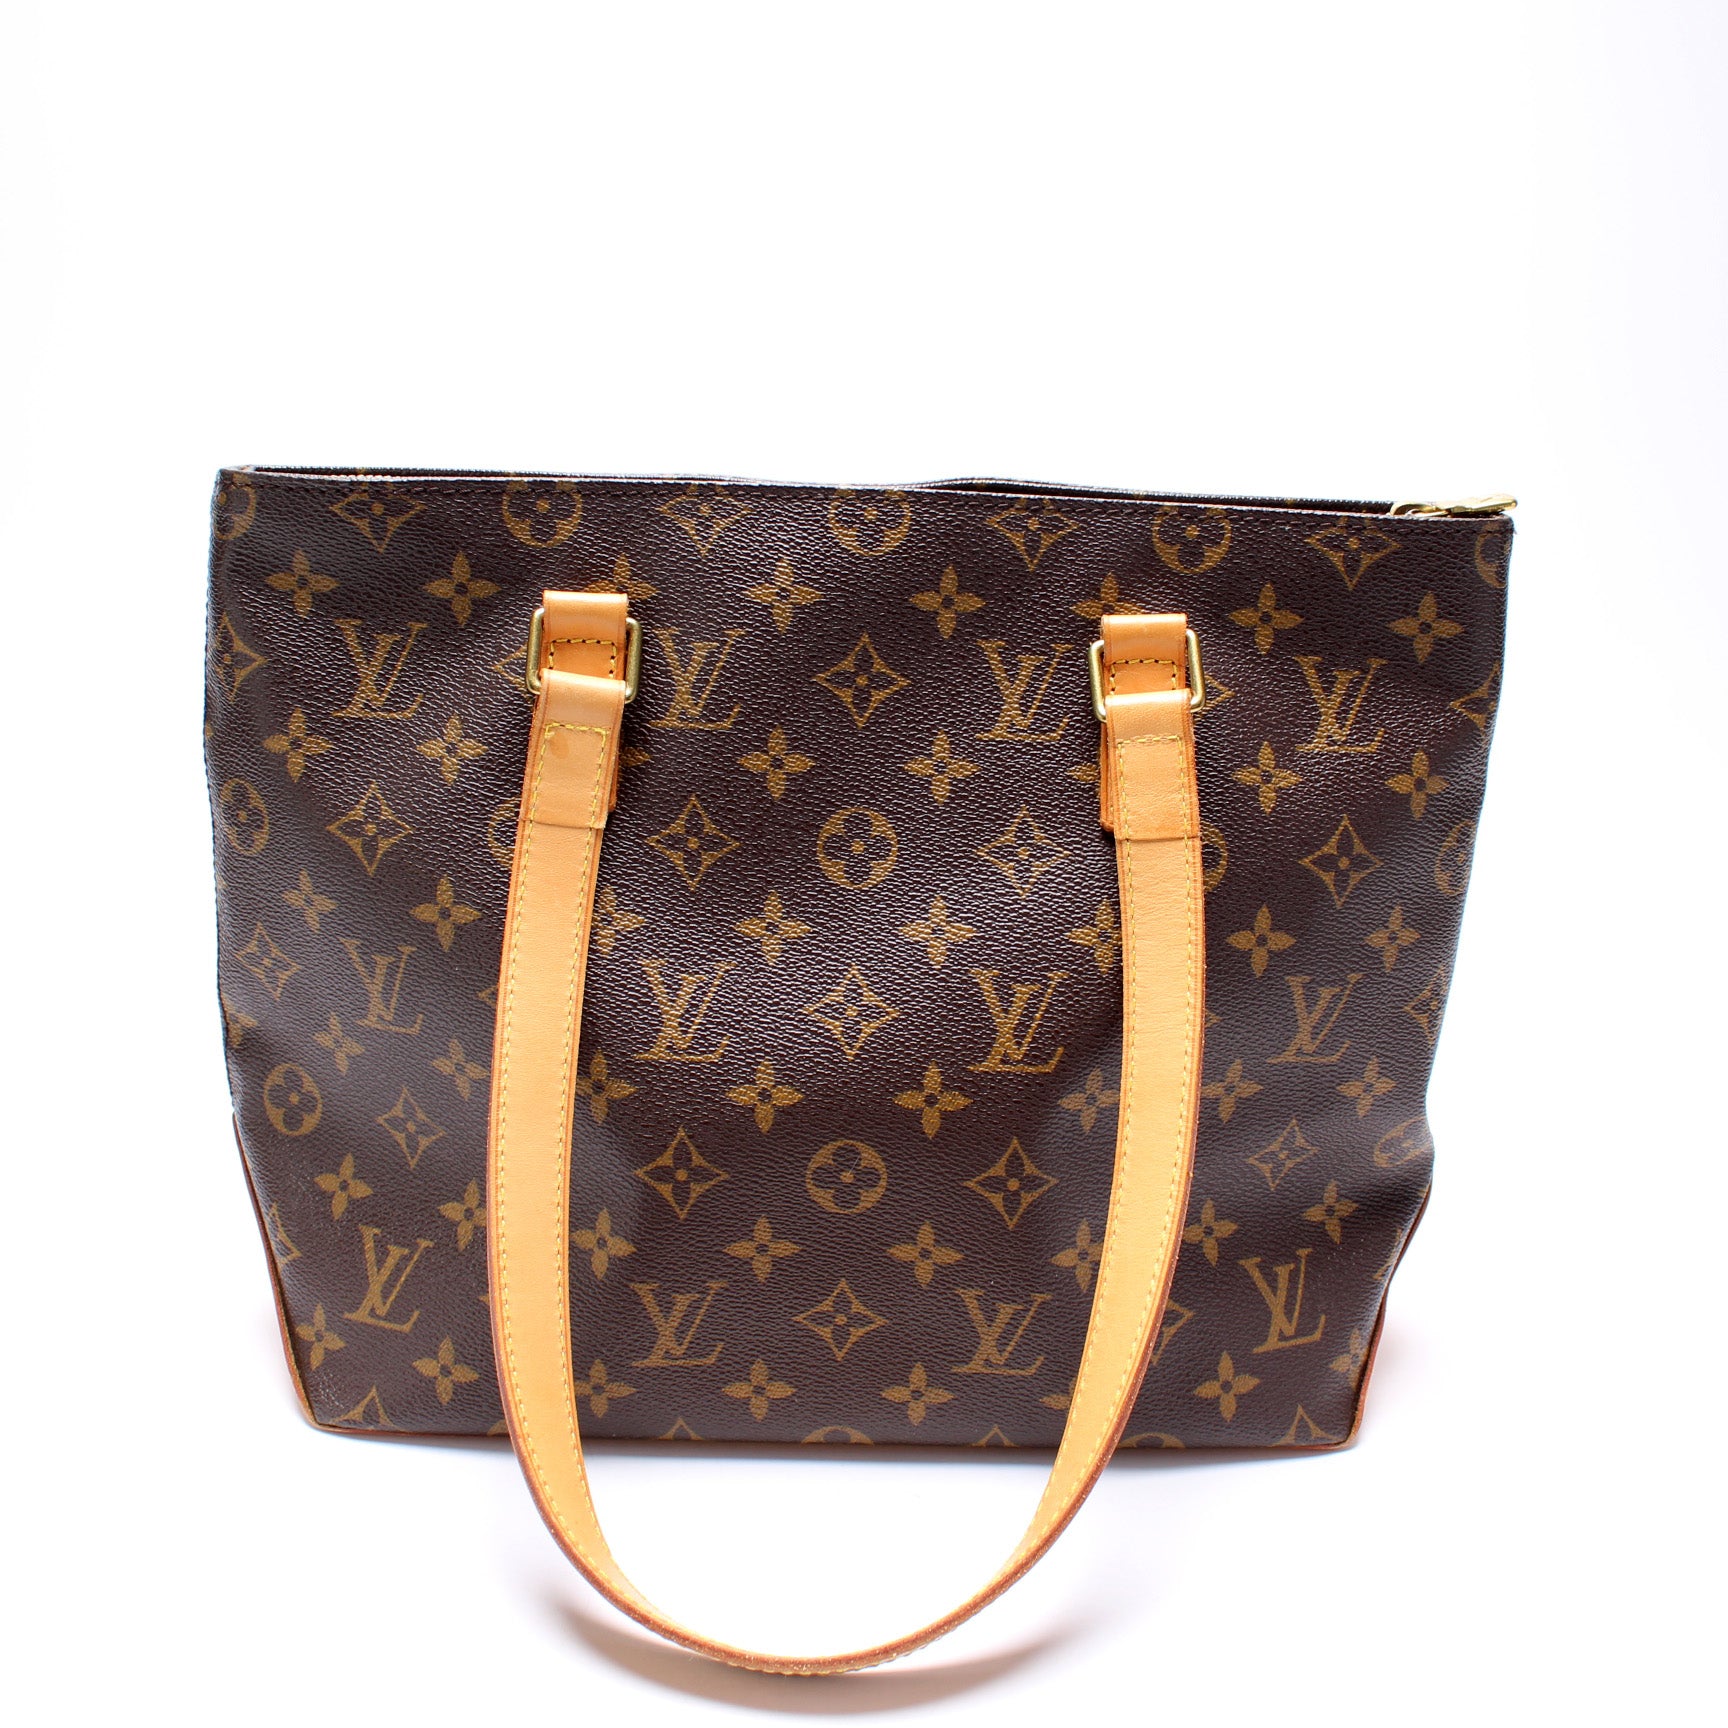 Louis Vuitton Cabas Piano Brown Canvas Tote Bag (Pre-Owned)